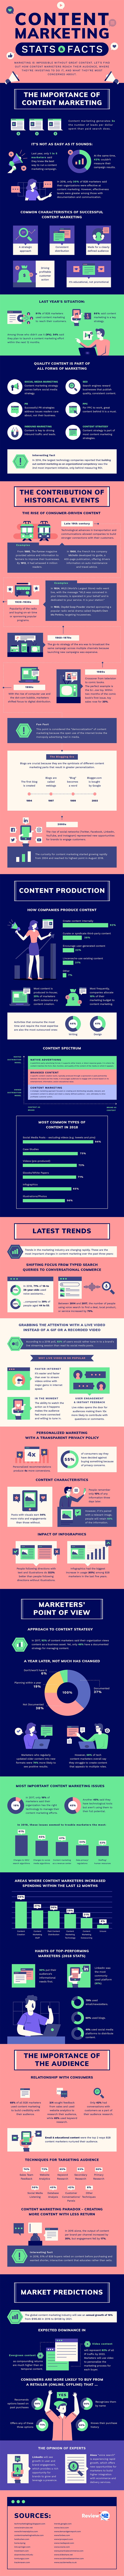 An infographic of content marketing statistics and facts, published to: "The Most Common Content Marketing Issues and How to Avoid Them (Infographic)"